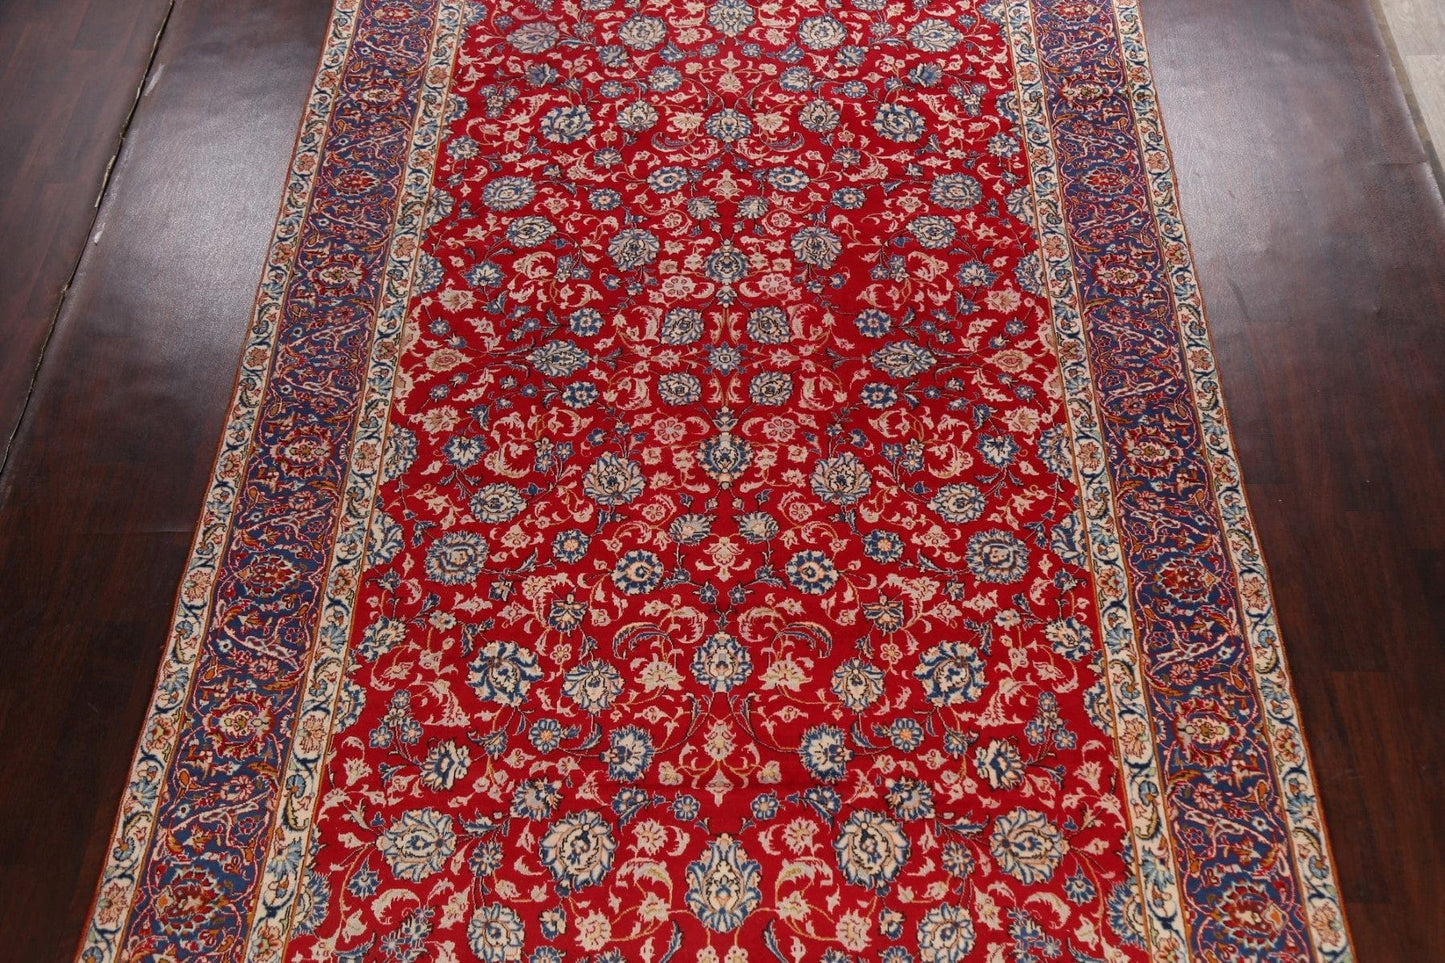 All-Over Floral Najafabad Persian Area Rug 8x13